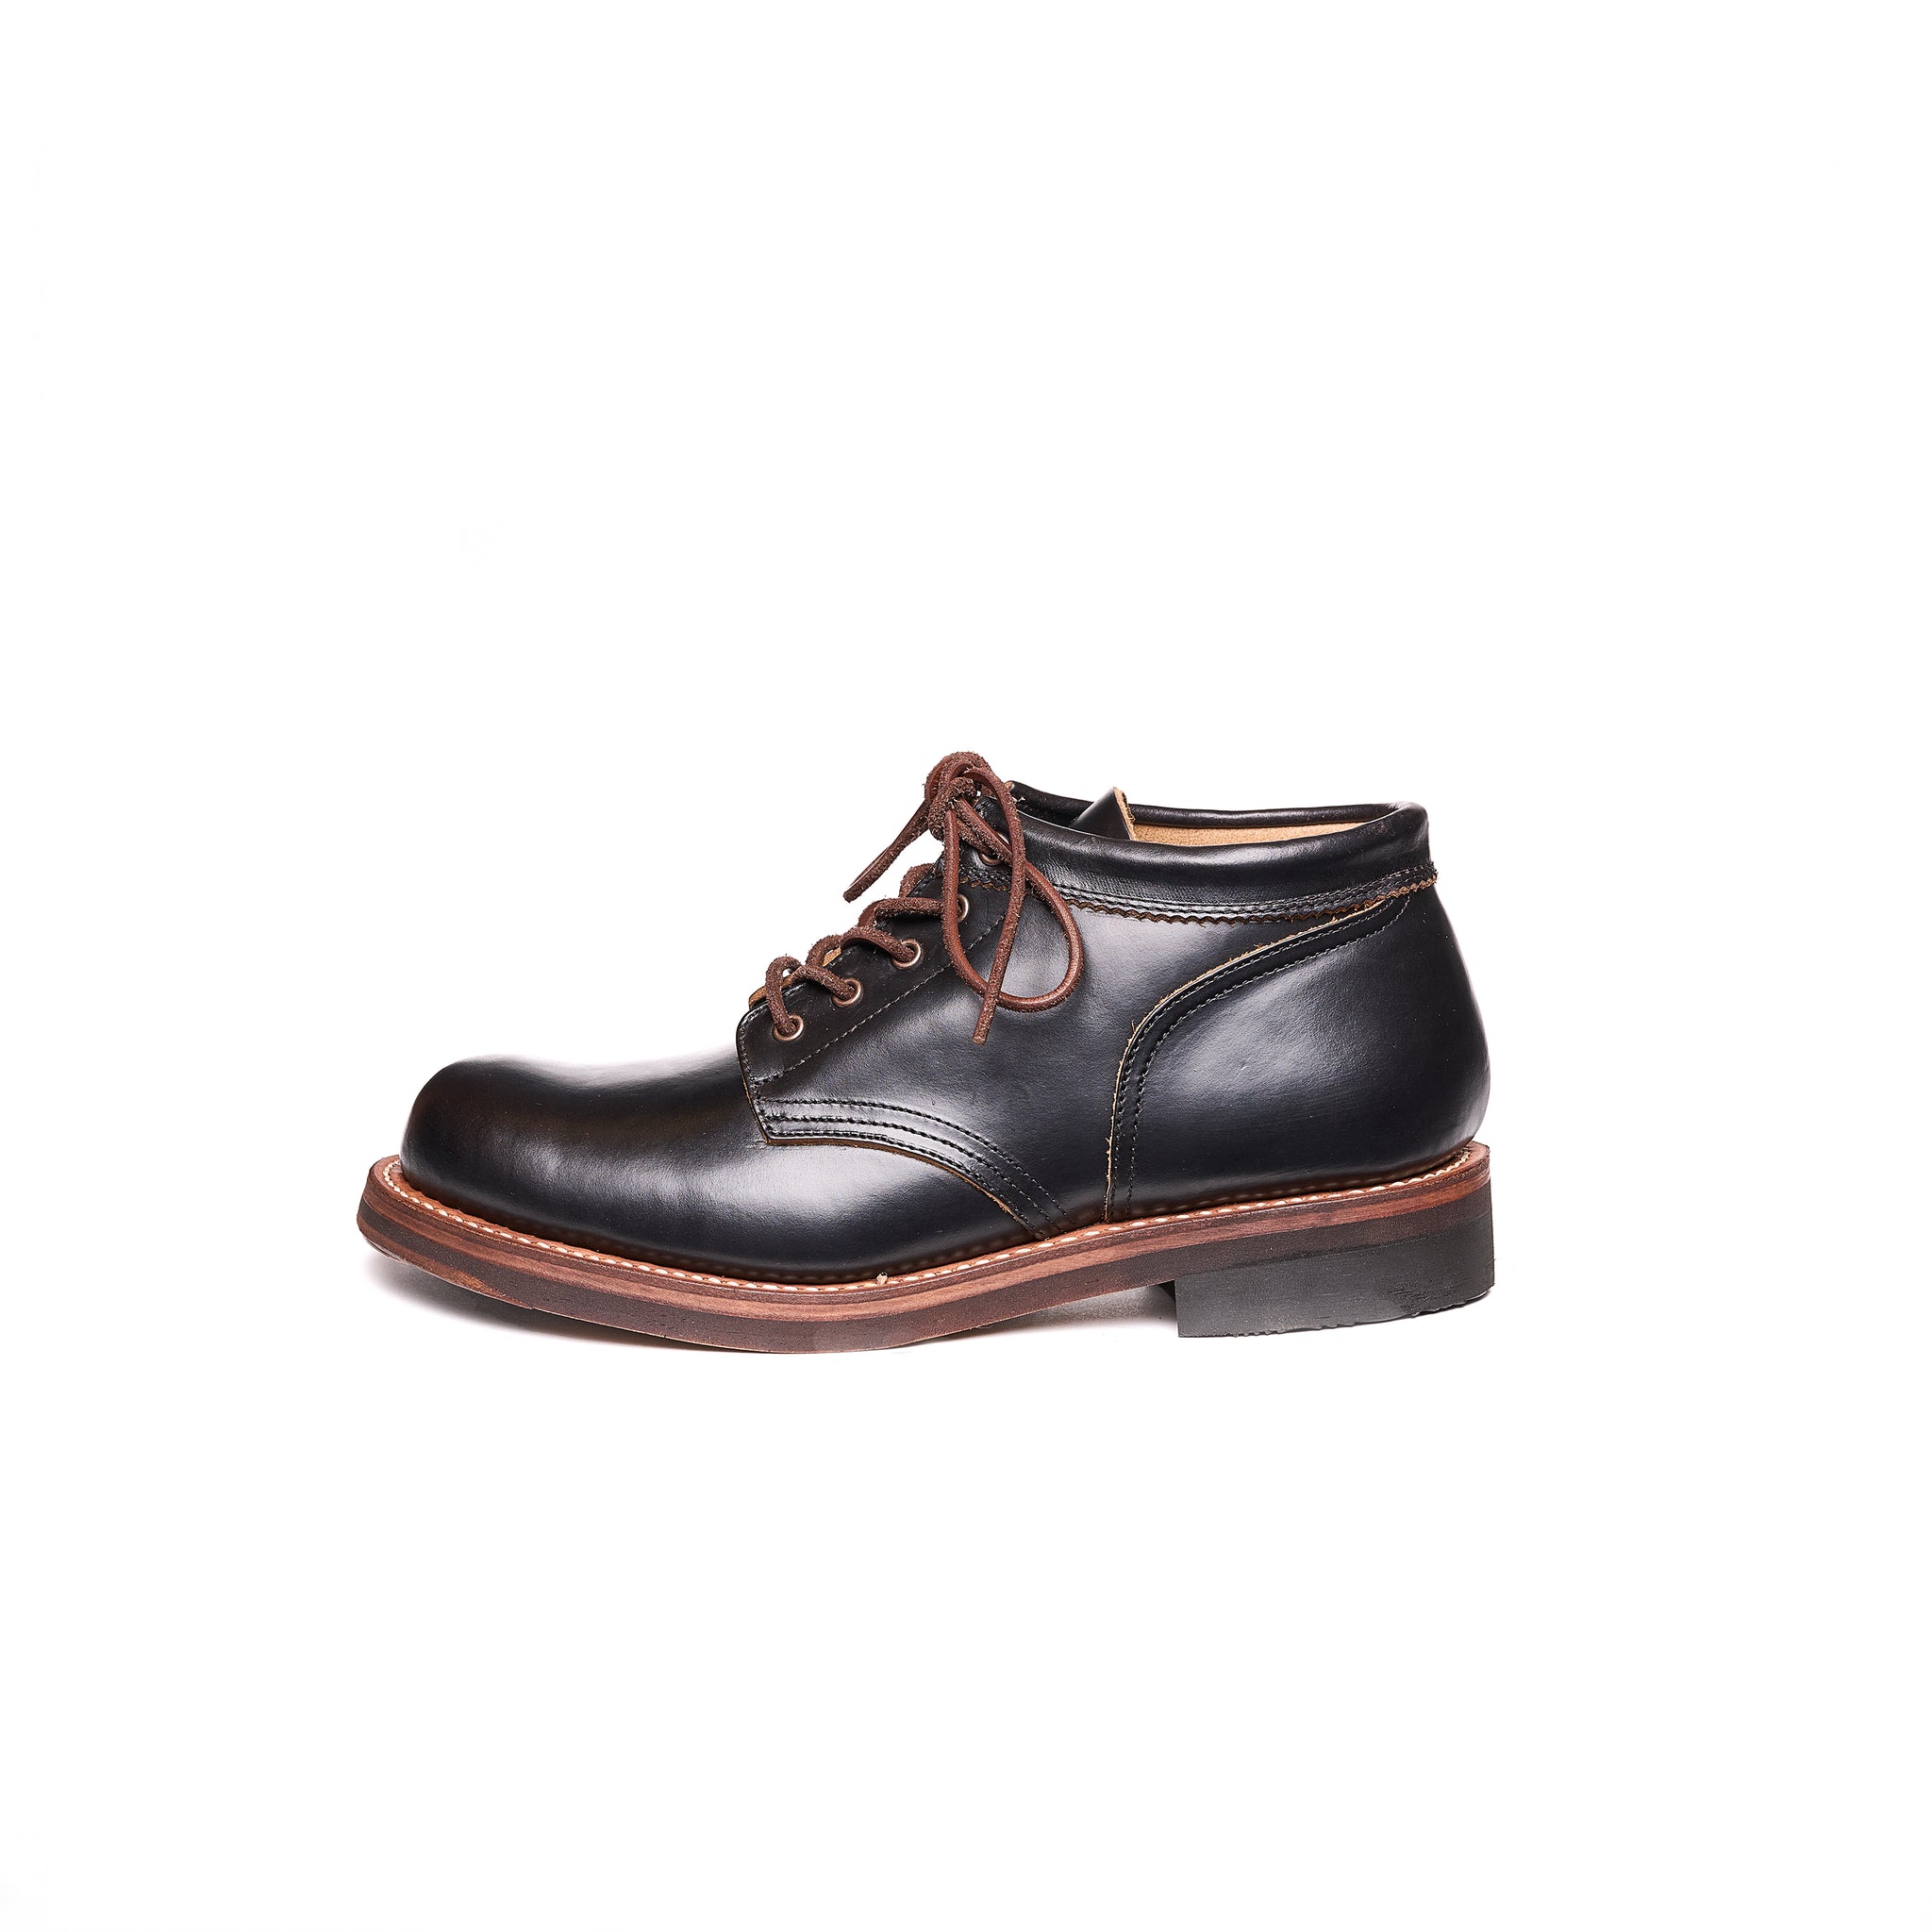 COUPEN［ROLLING DUB TRIO］redwing